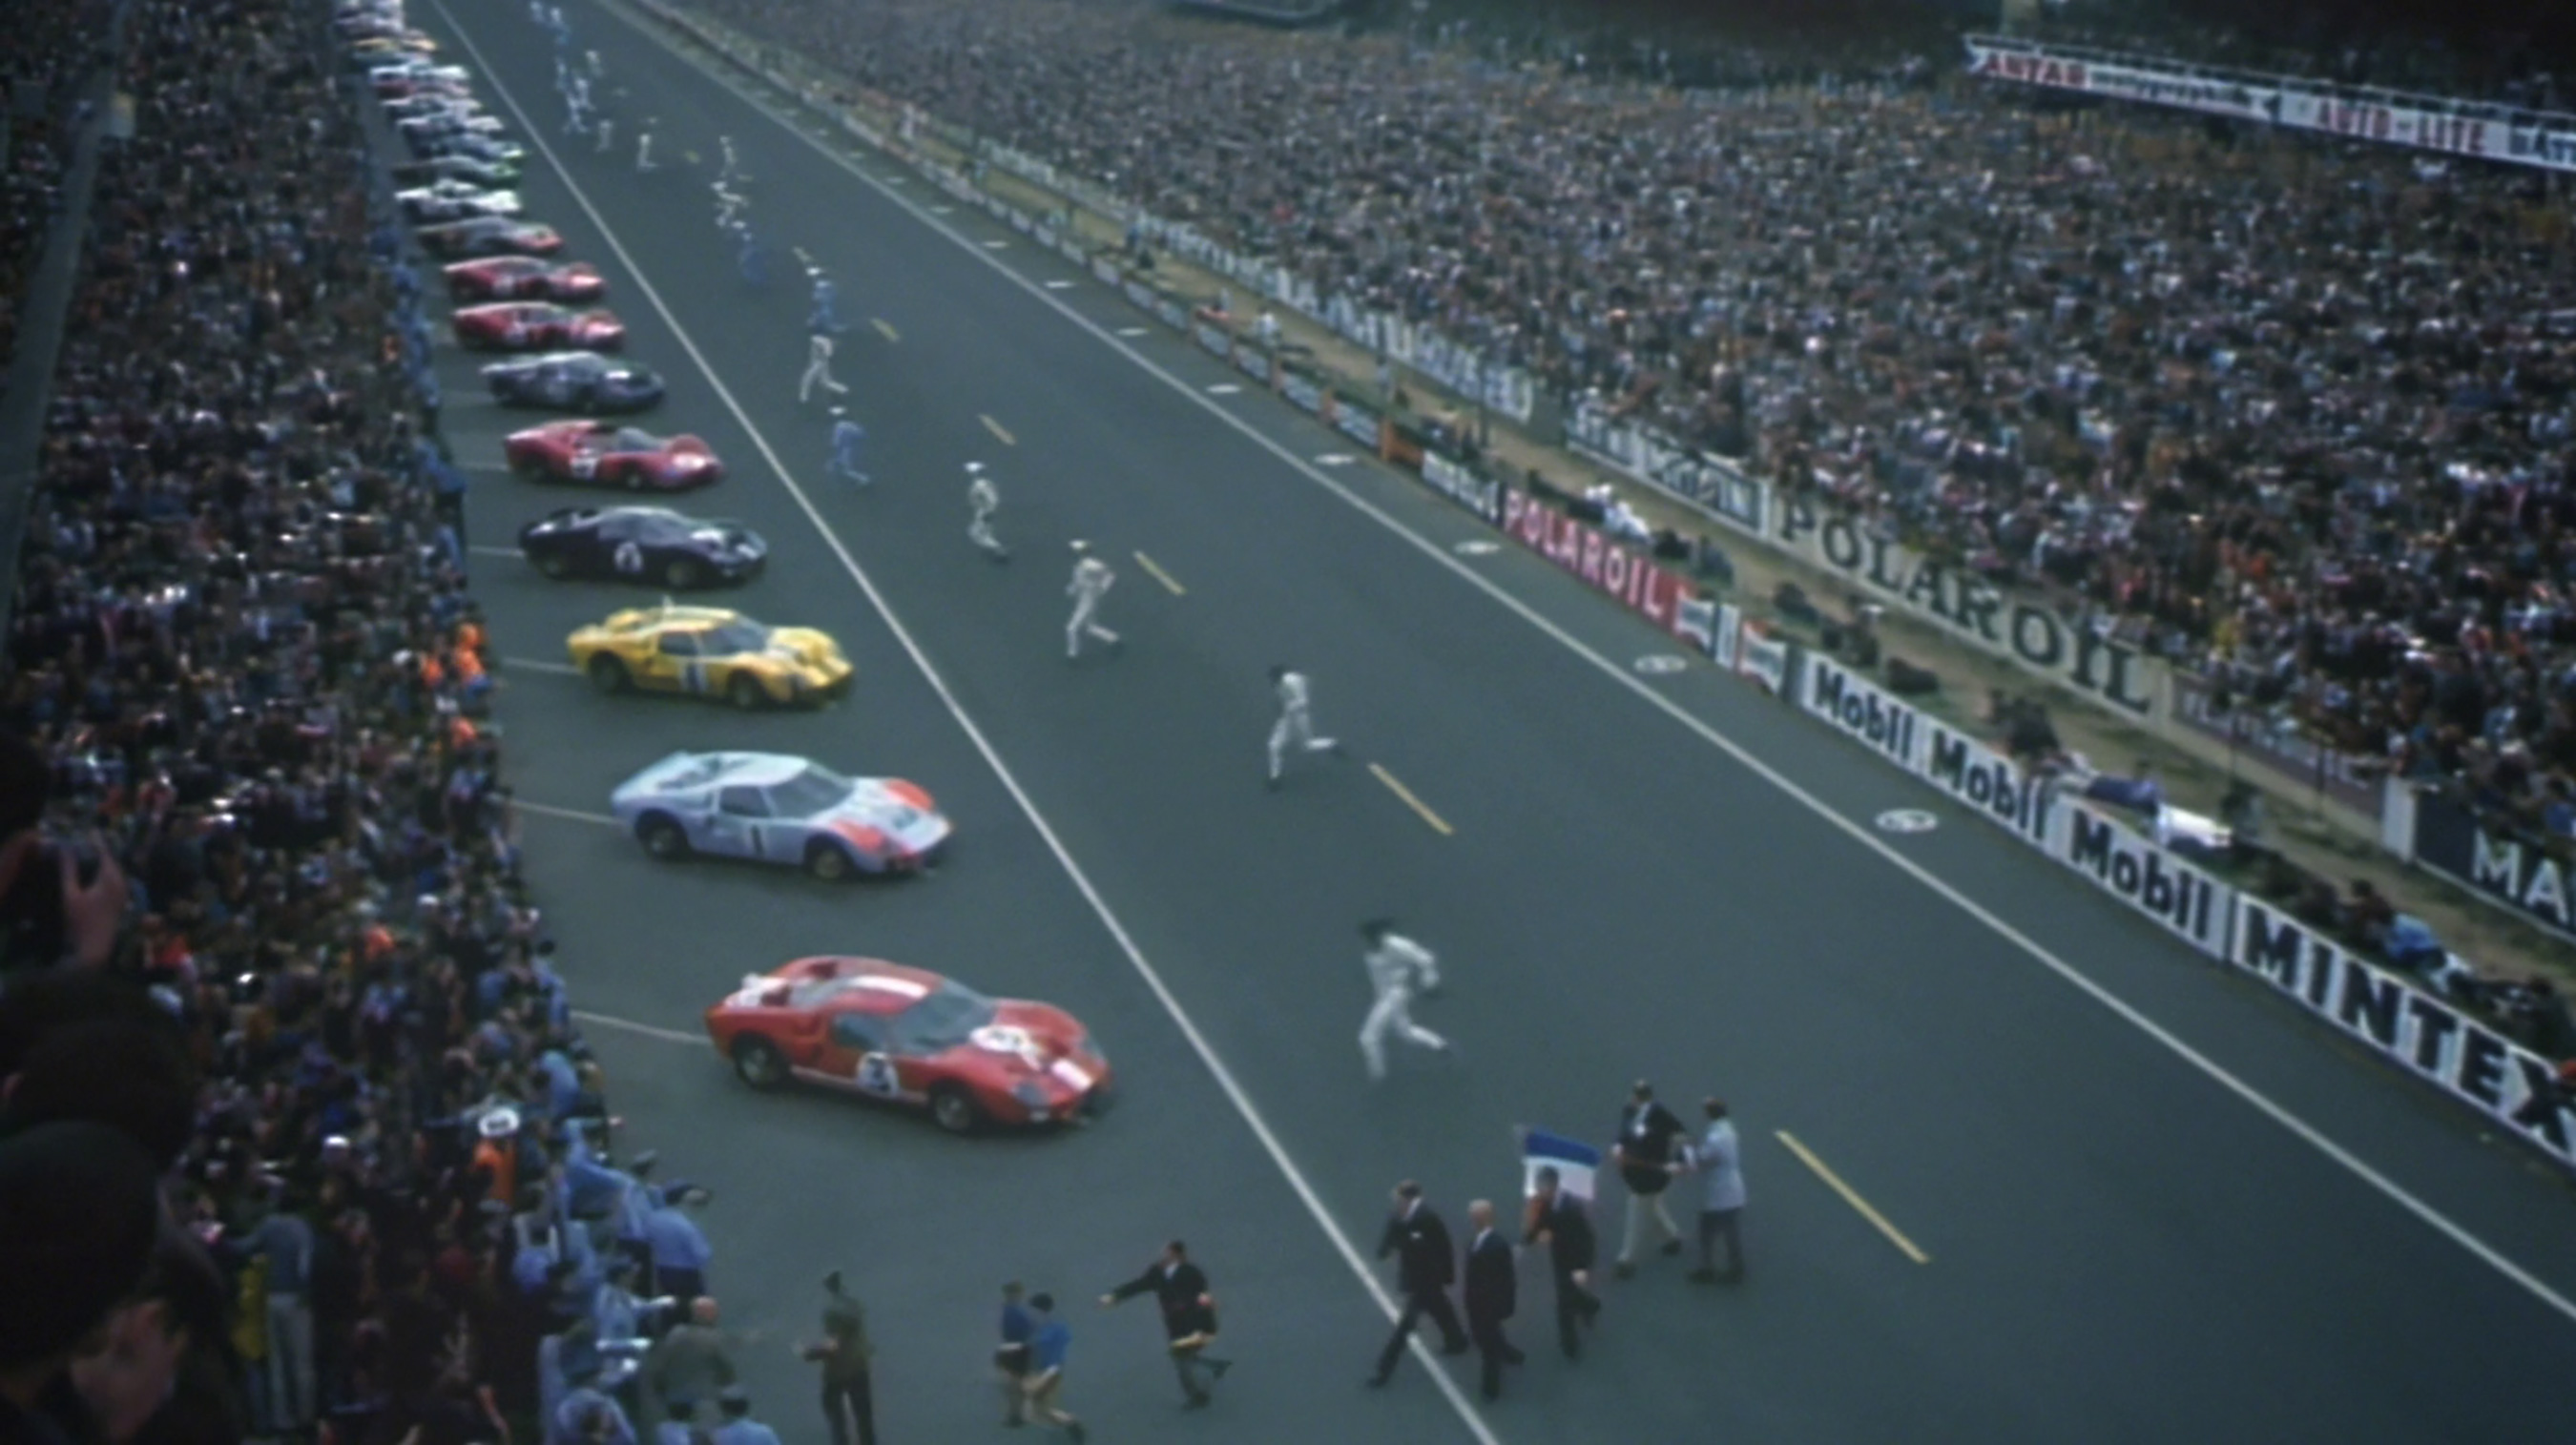 The 24 Hours of Le mans